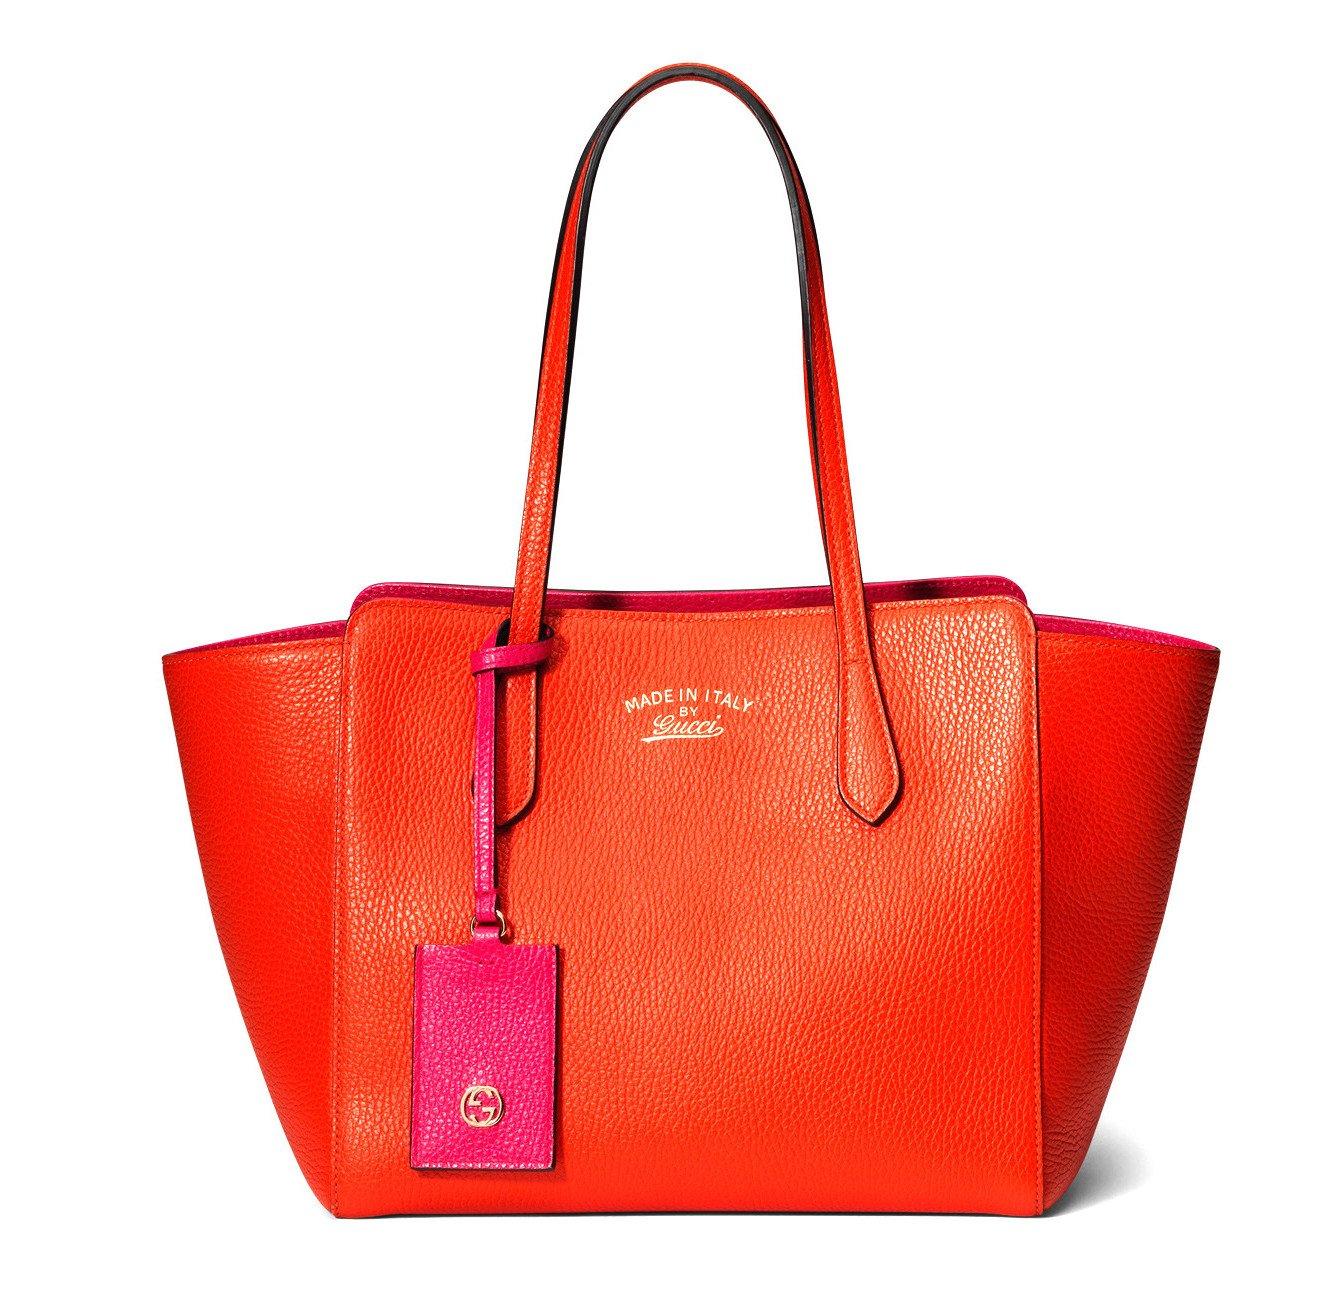 Carry It ALL: The Best Designer Tote Bags - PurseBop